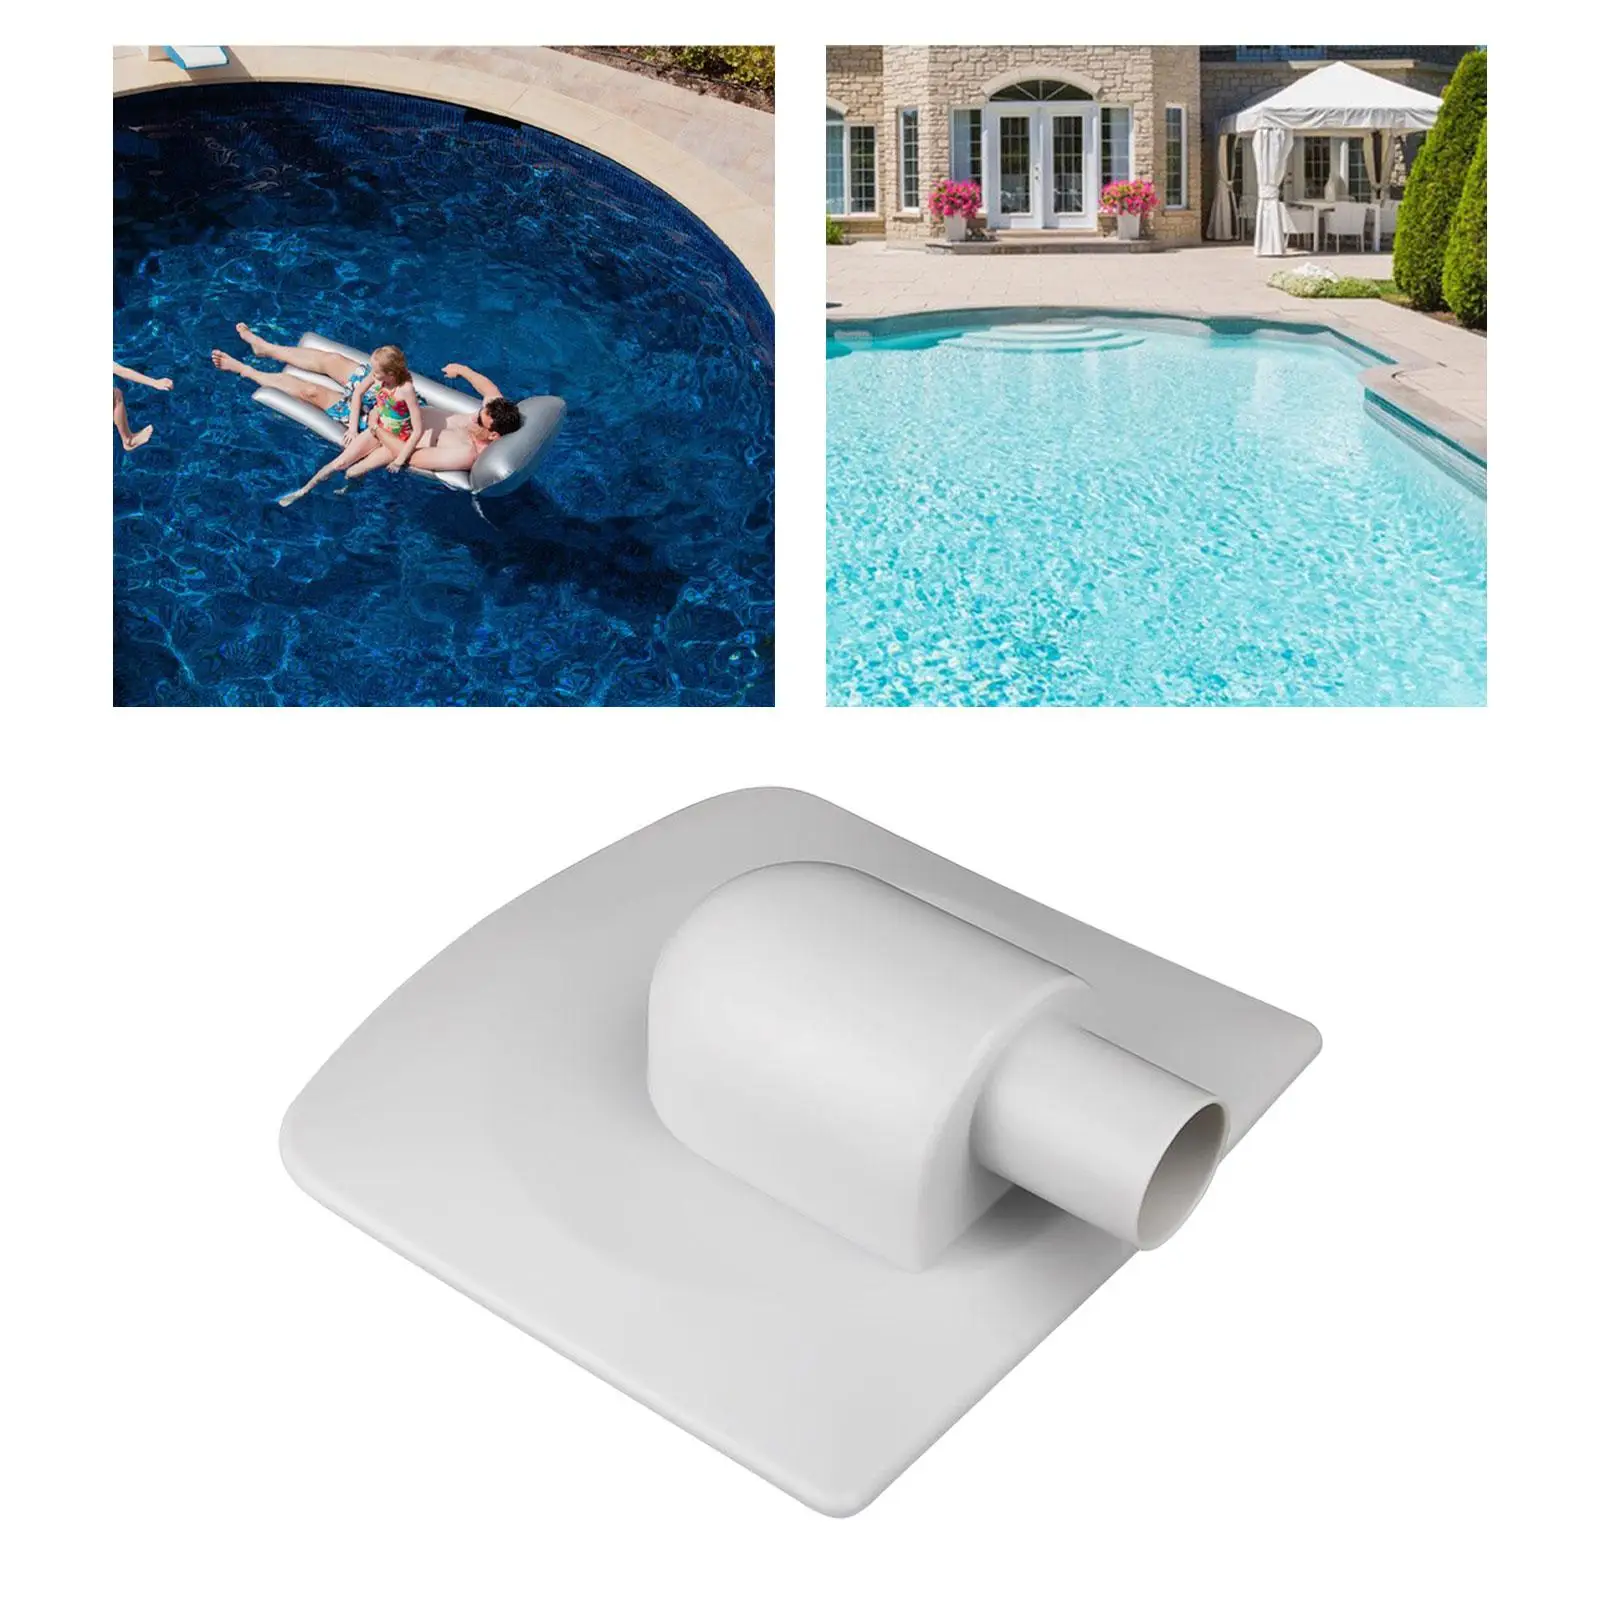 Pool Skimmer Plate Replace Maintenance Kit Garden Pool Pump Parts Accessories